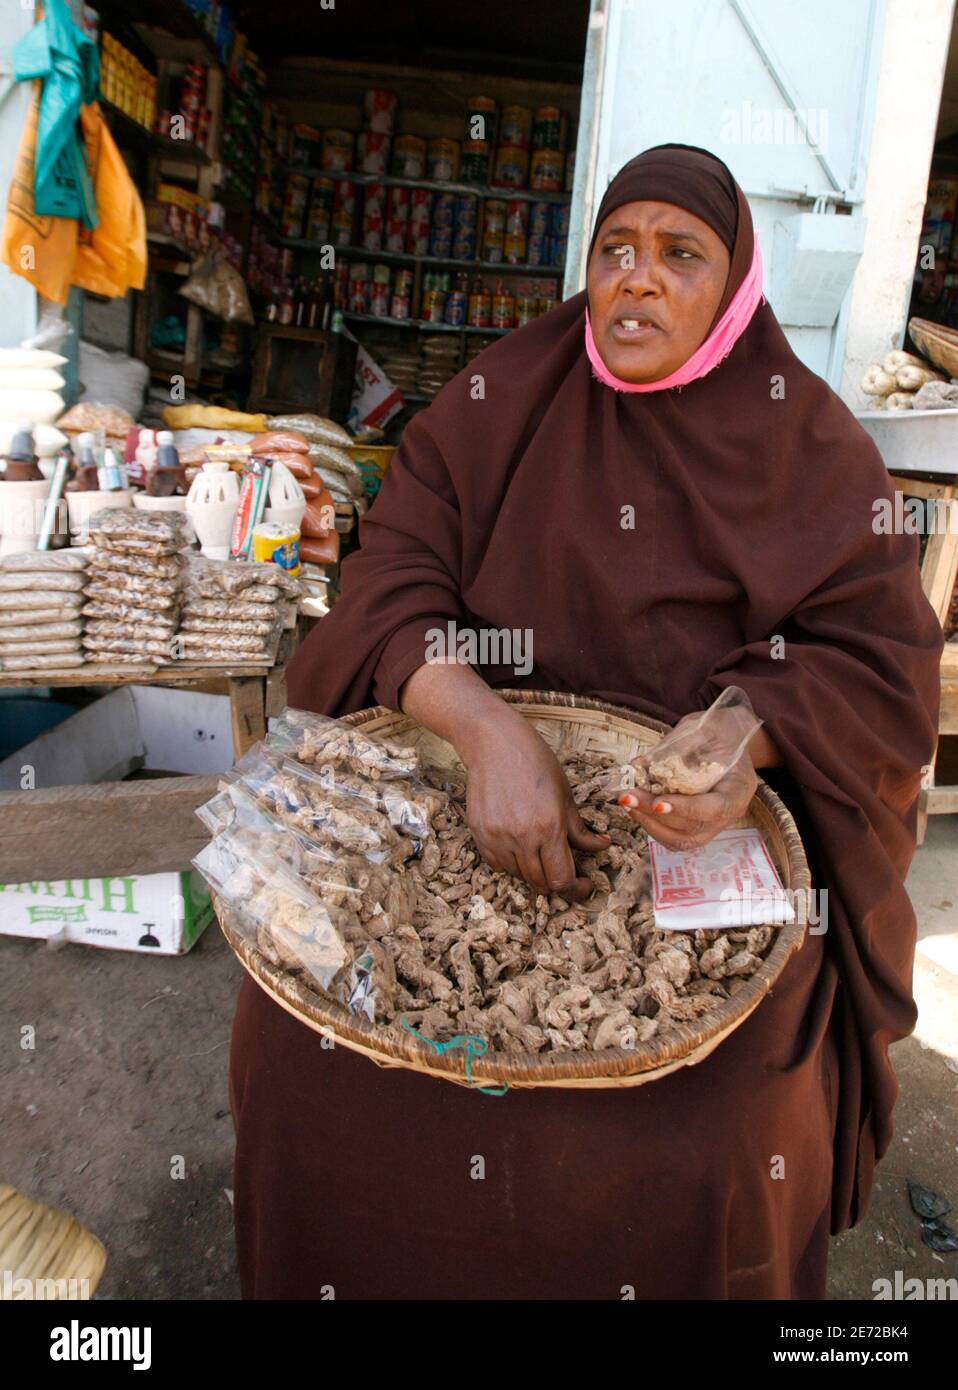 A Somali woman packs ginger roots in bags in the Eastleigh neighbourhood of Nairobi, June 25, 2009. The bustling Eastleigh suburb has been the hub of business for Kenyan-Somalis and thousands of refugees escaping civil war in neighbouring Somalia for decades. But as people flee the continuing conflict in Somalia, the population is outgrowing Eastleigh's 'Little Mogadishu' and Somalis are venturing into other parts of the city. Picture taken June 25, 2009. REUTERS/Thomas Mukoya (KENYA SOCIETY CONFLICT BUSINESS) Stock Photo